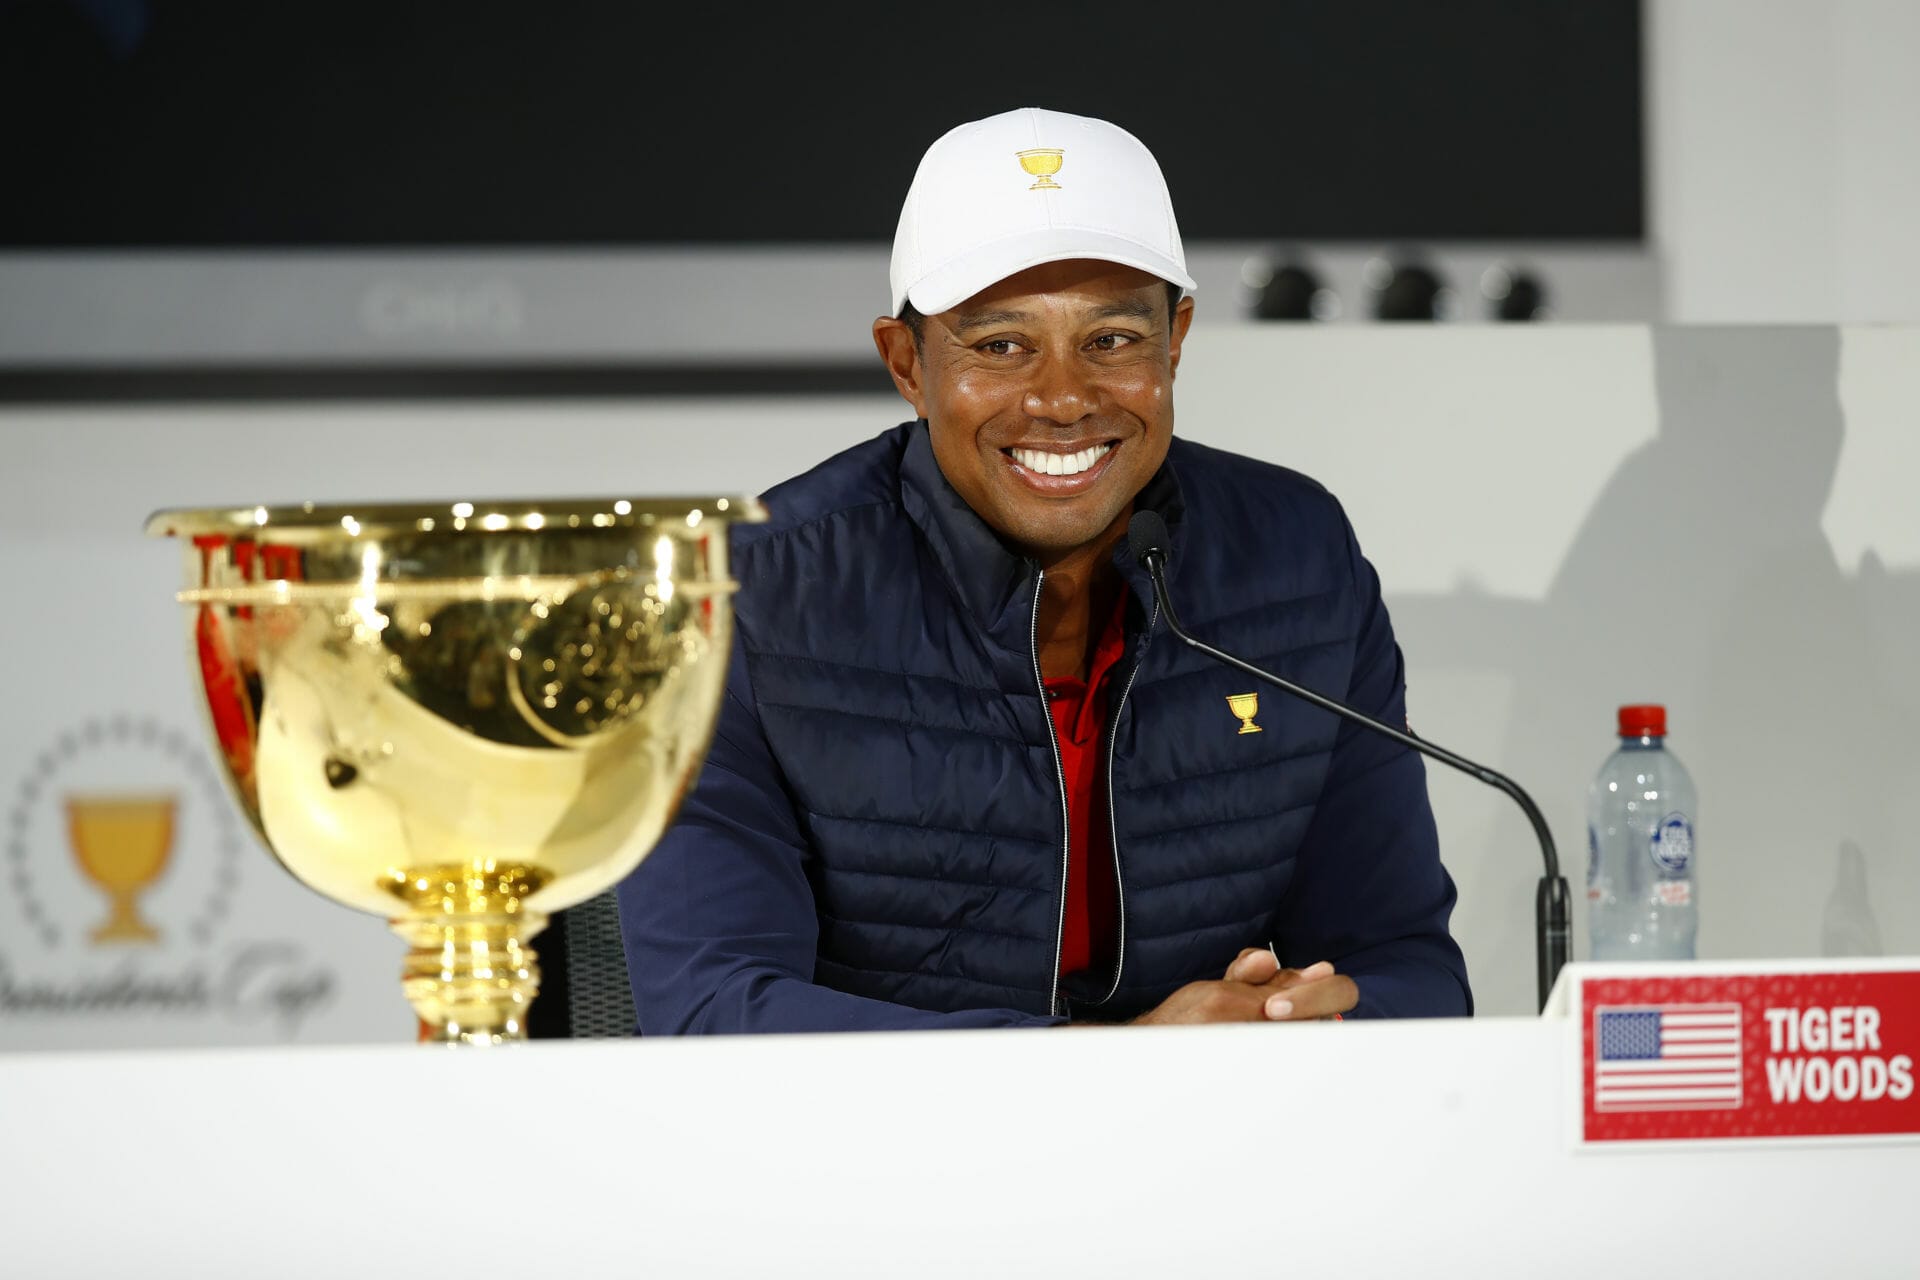 Woods plays down hype surrounding potential Ryder Cup Captaincy